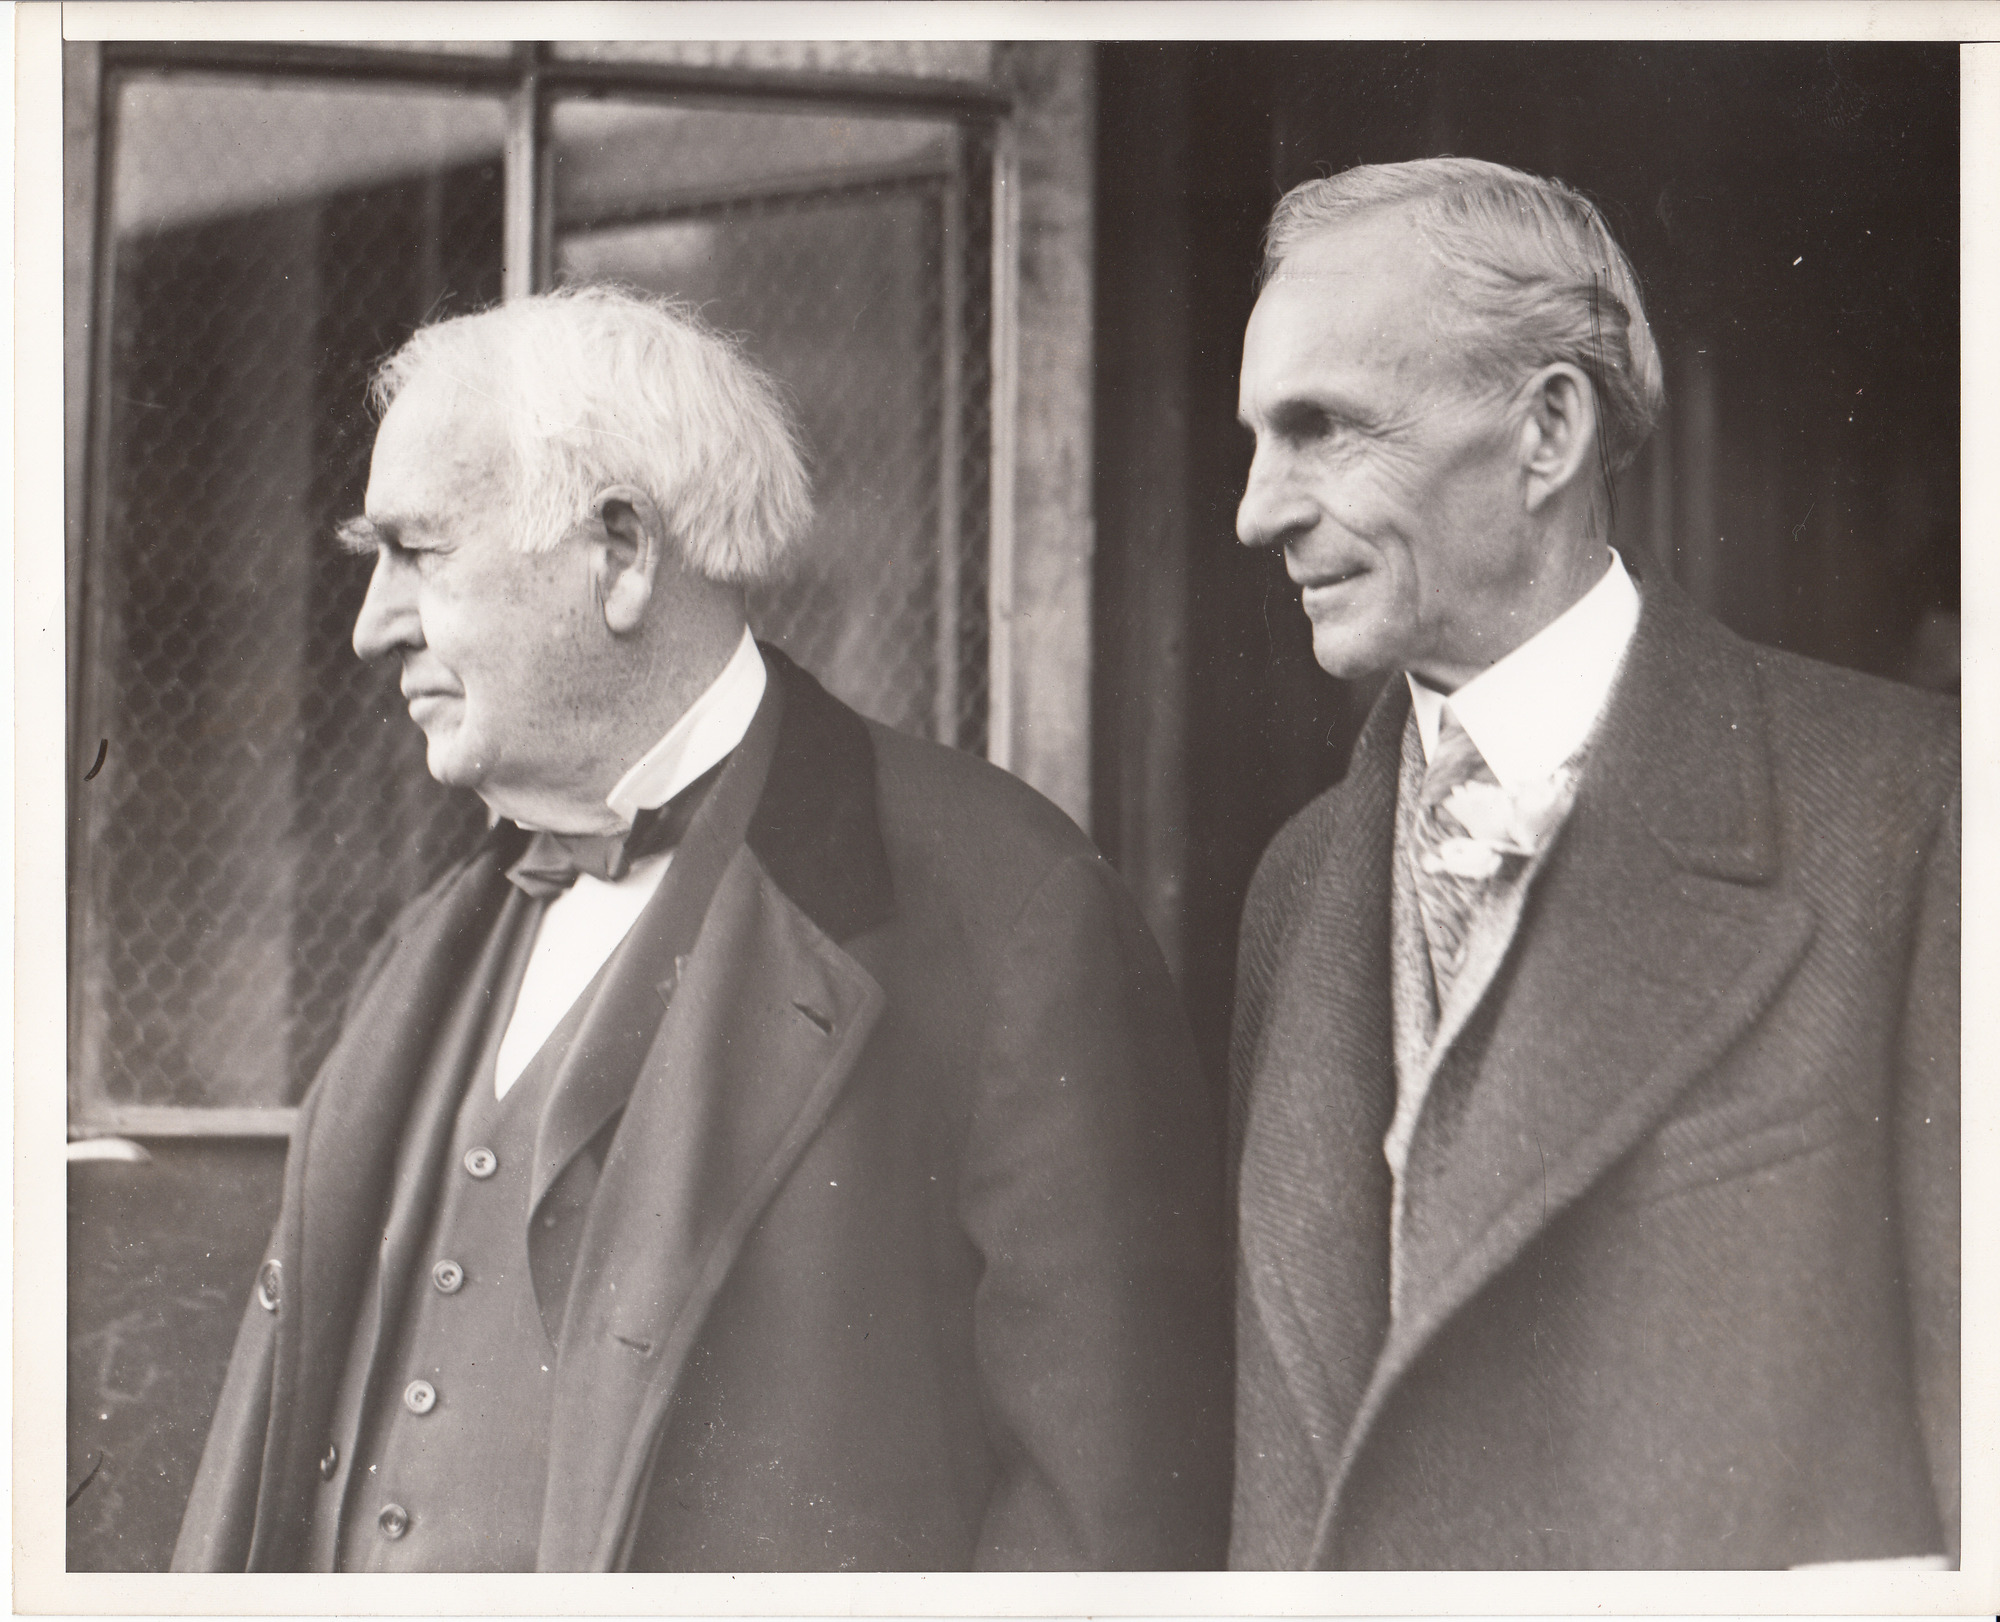 Thomas Edison and Henry Ford on Edison's 80th birthday.